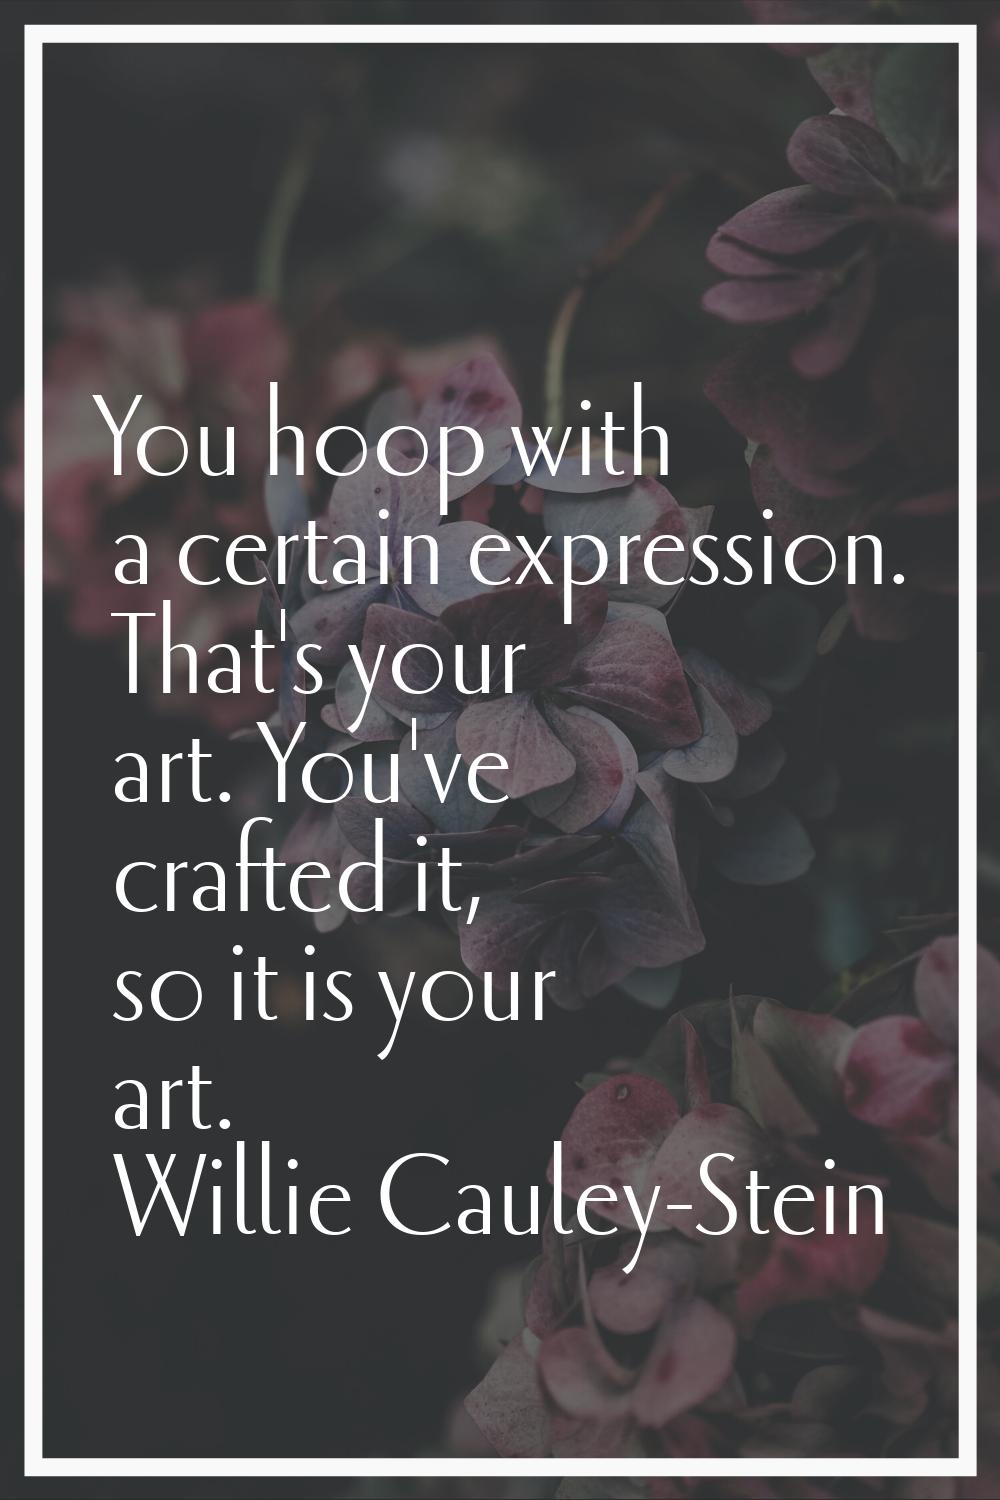 You hoop with a certain expression. That's your art. You've crafted it, so it is your art.